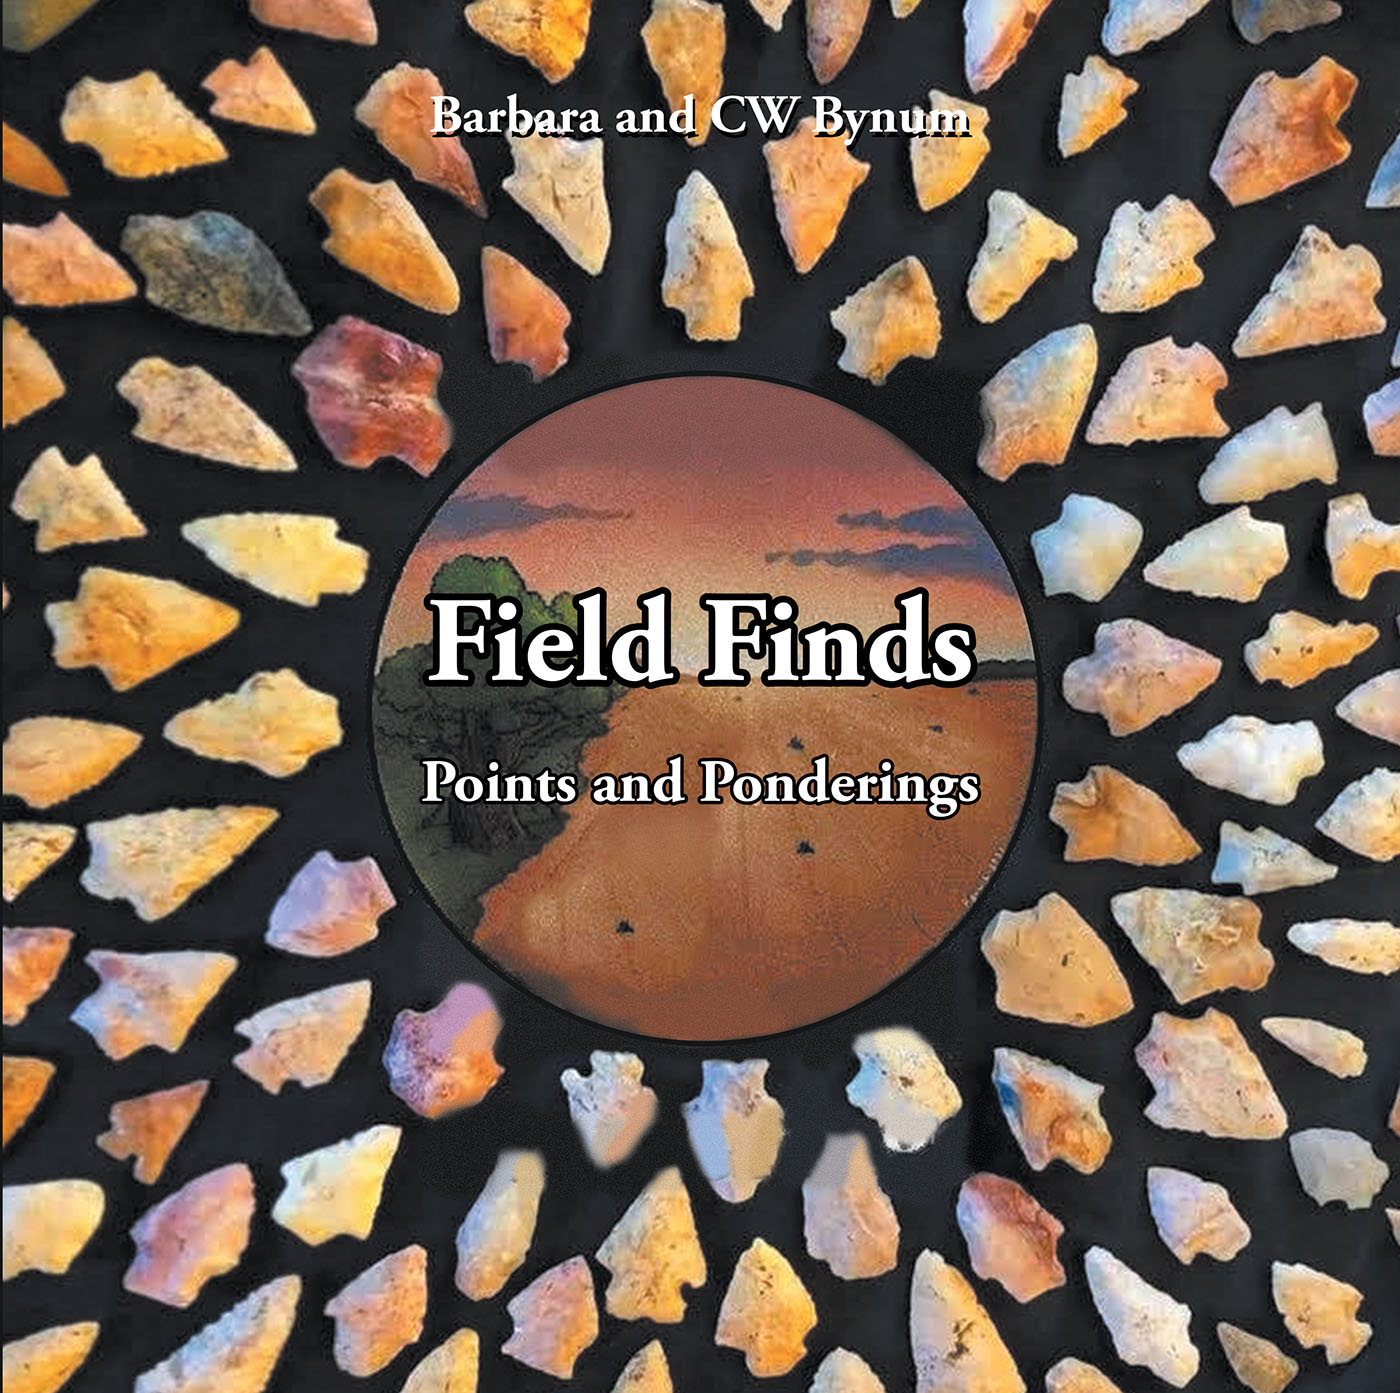 Authors Barbara and CW Bynum’s New Book, “Field Finds: Points and Ponderings,” is a Memorial to CW Bynum, a Passionate Lifelong Arrowhead Hunter and Collector